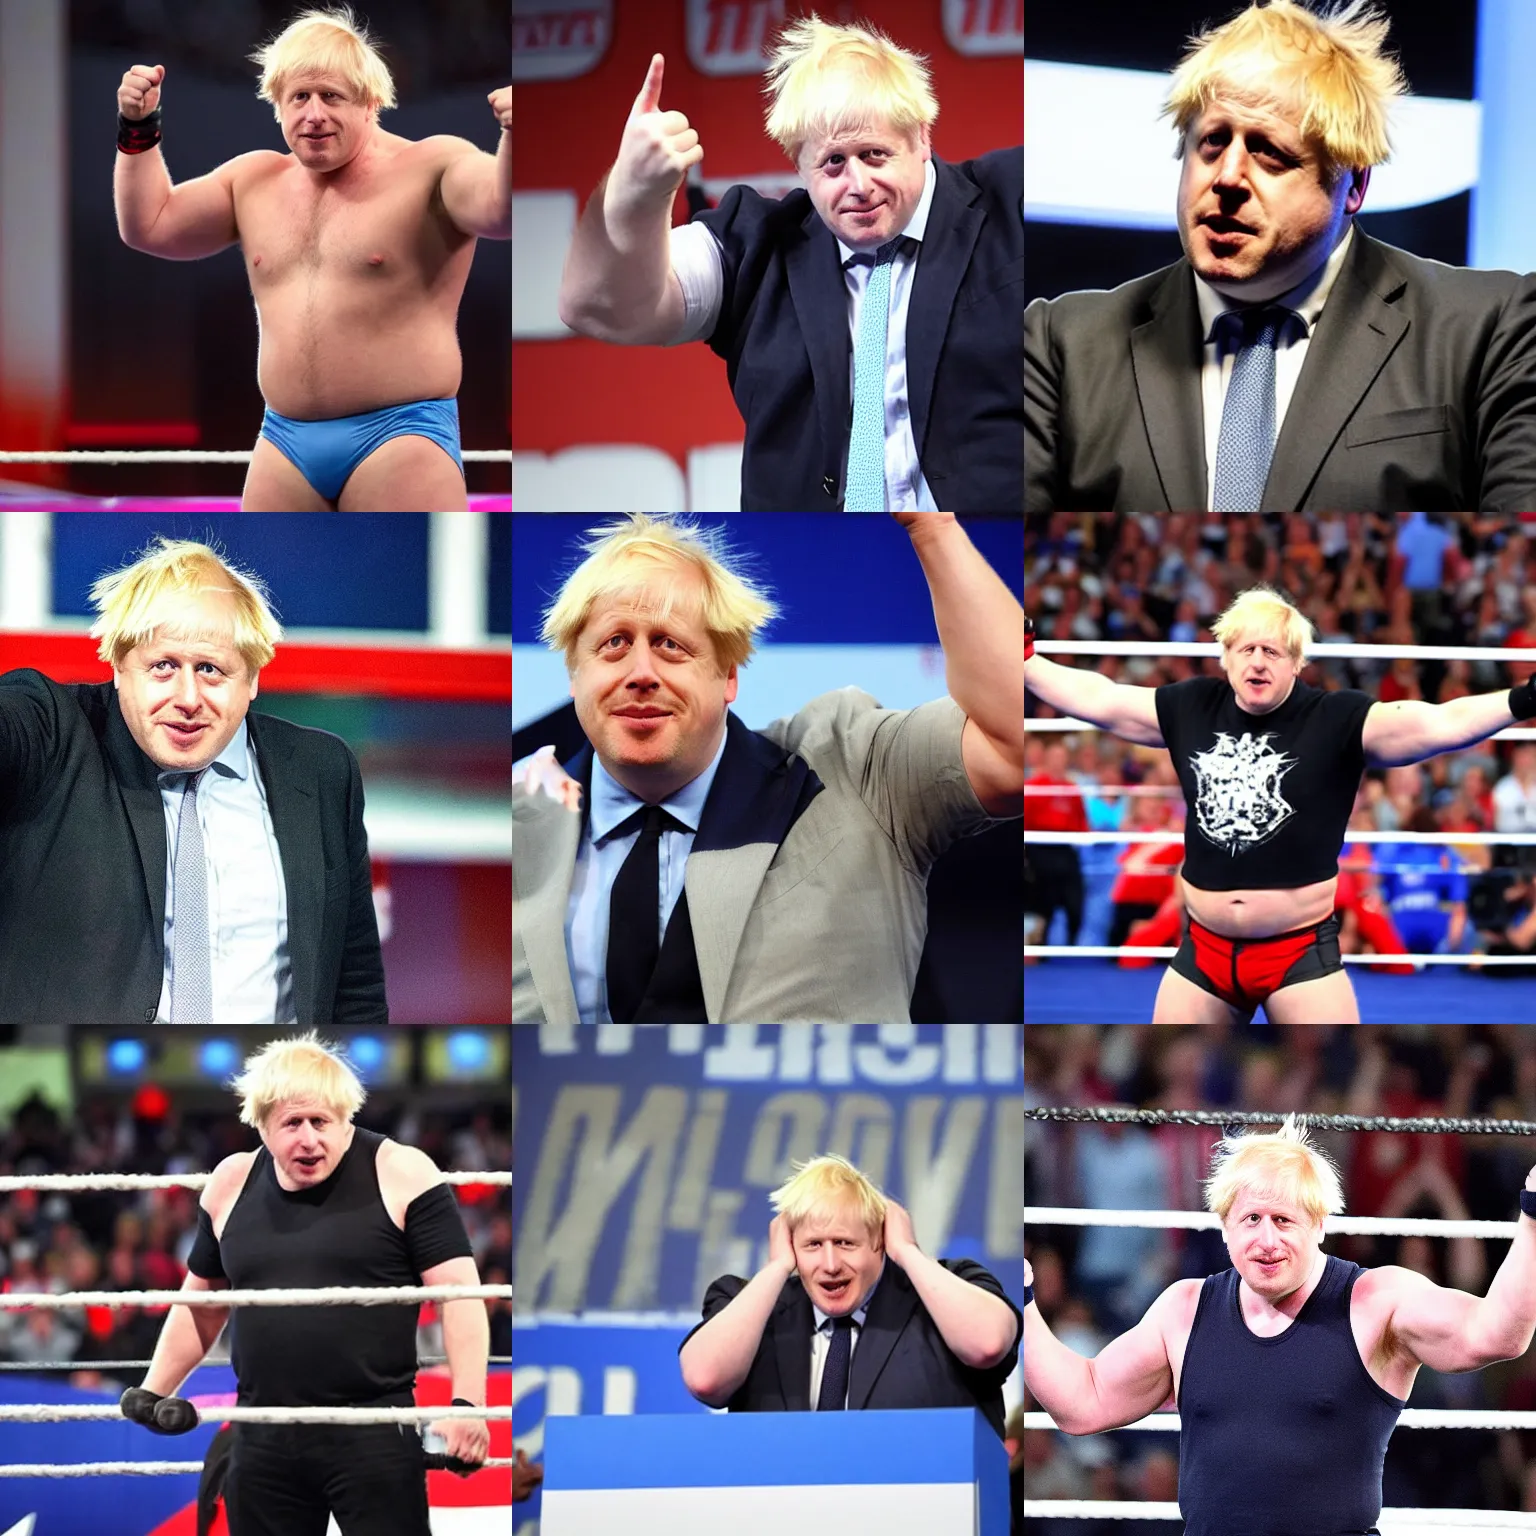 Prompt: boris johnson as a muscular wwe wrestler wearing a cap. he is holding his open hand high and hiding his face with his hand